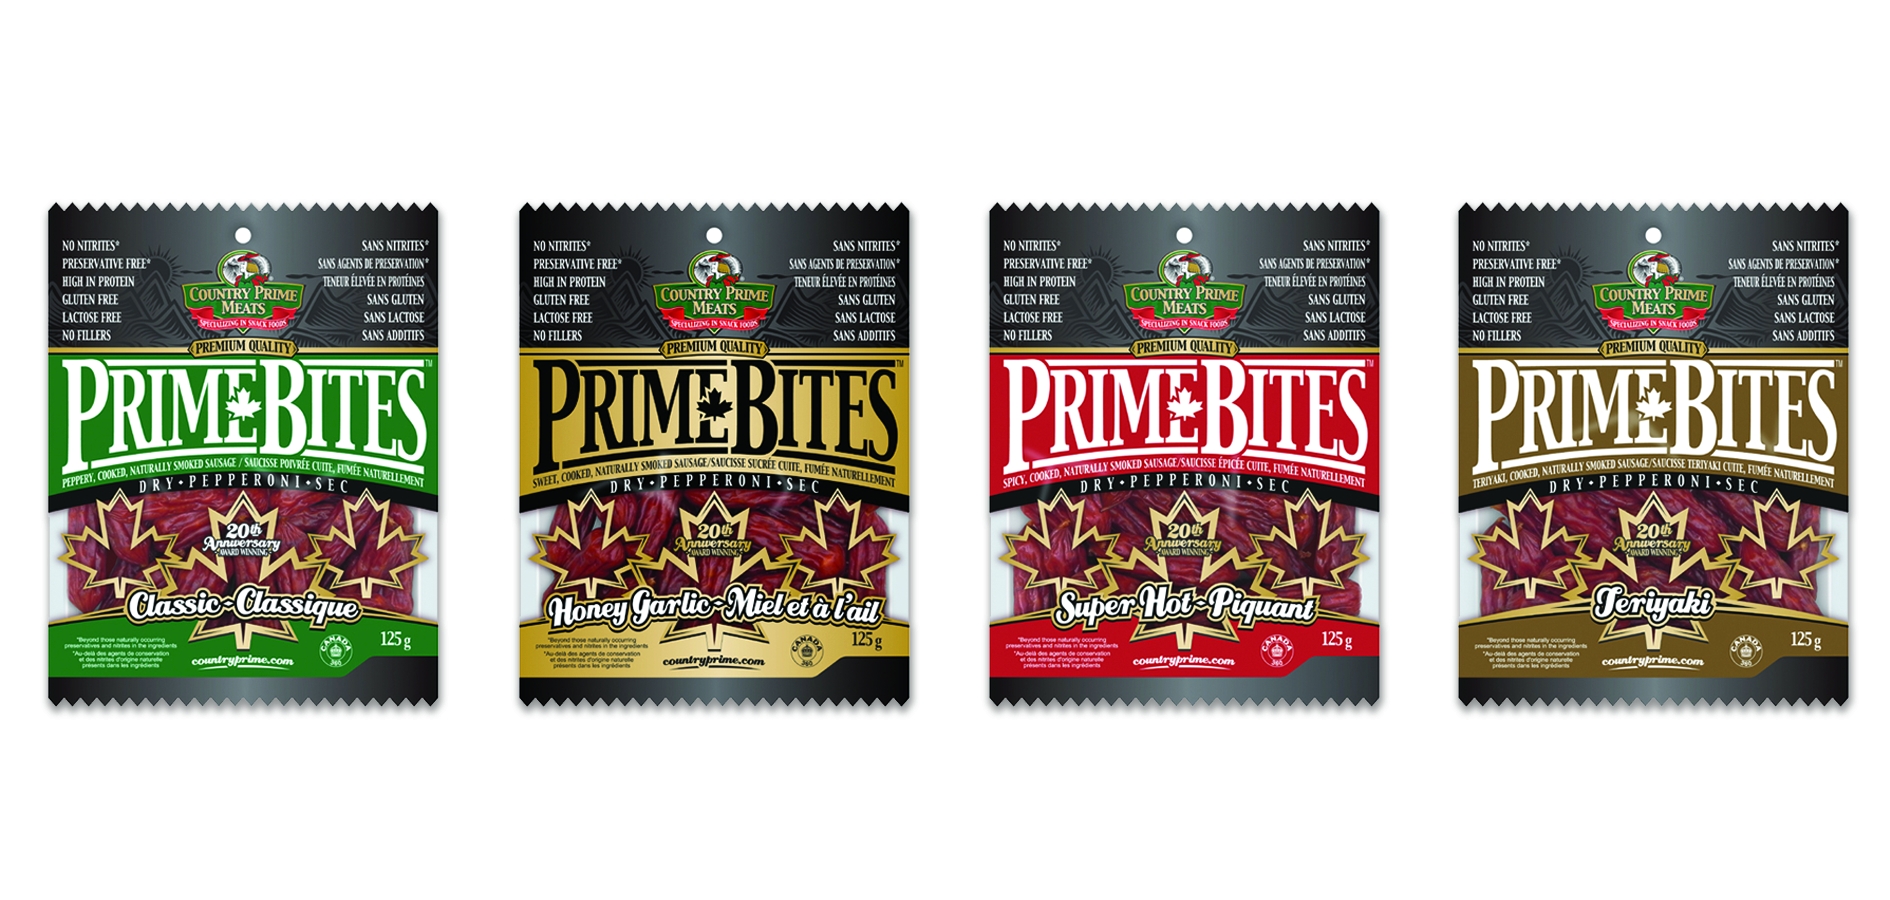 Country Prime Meats Ltd image 2017